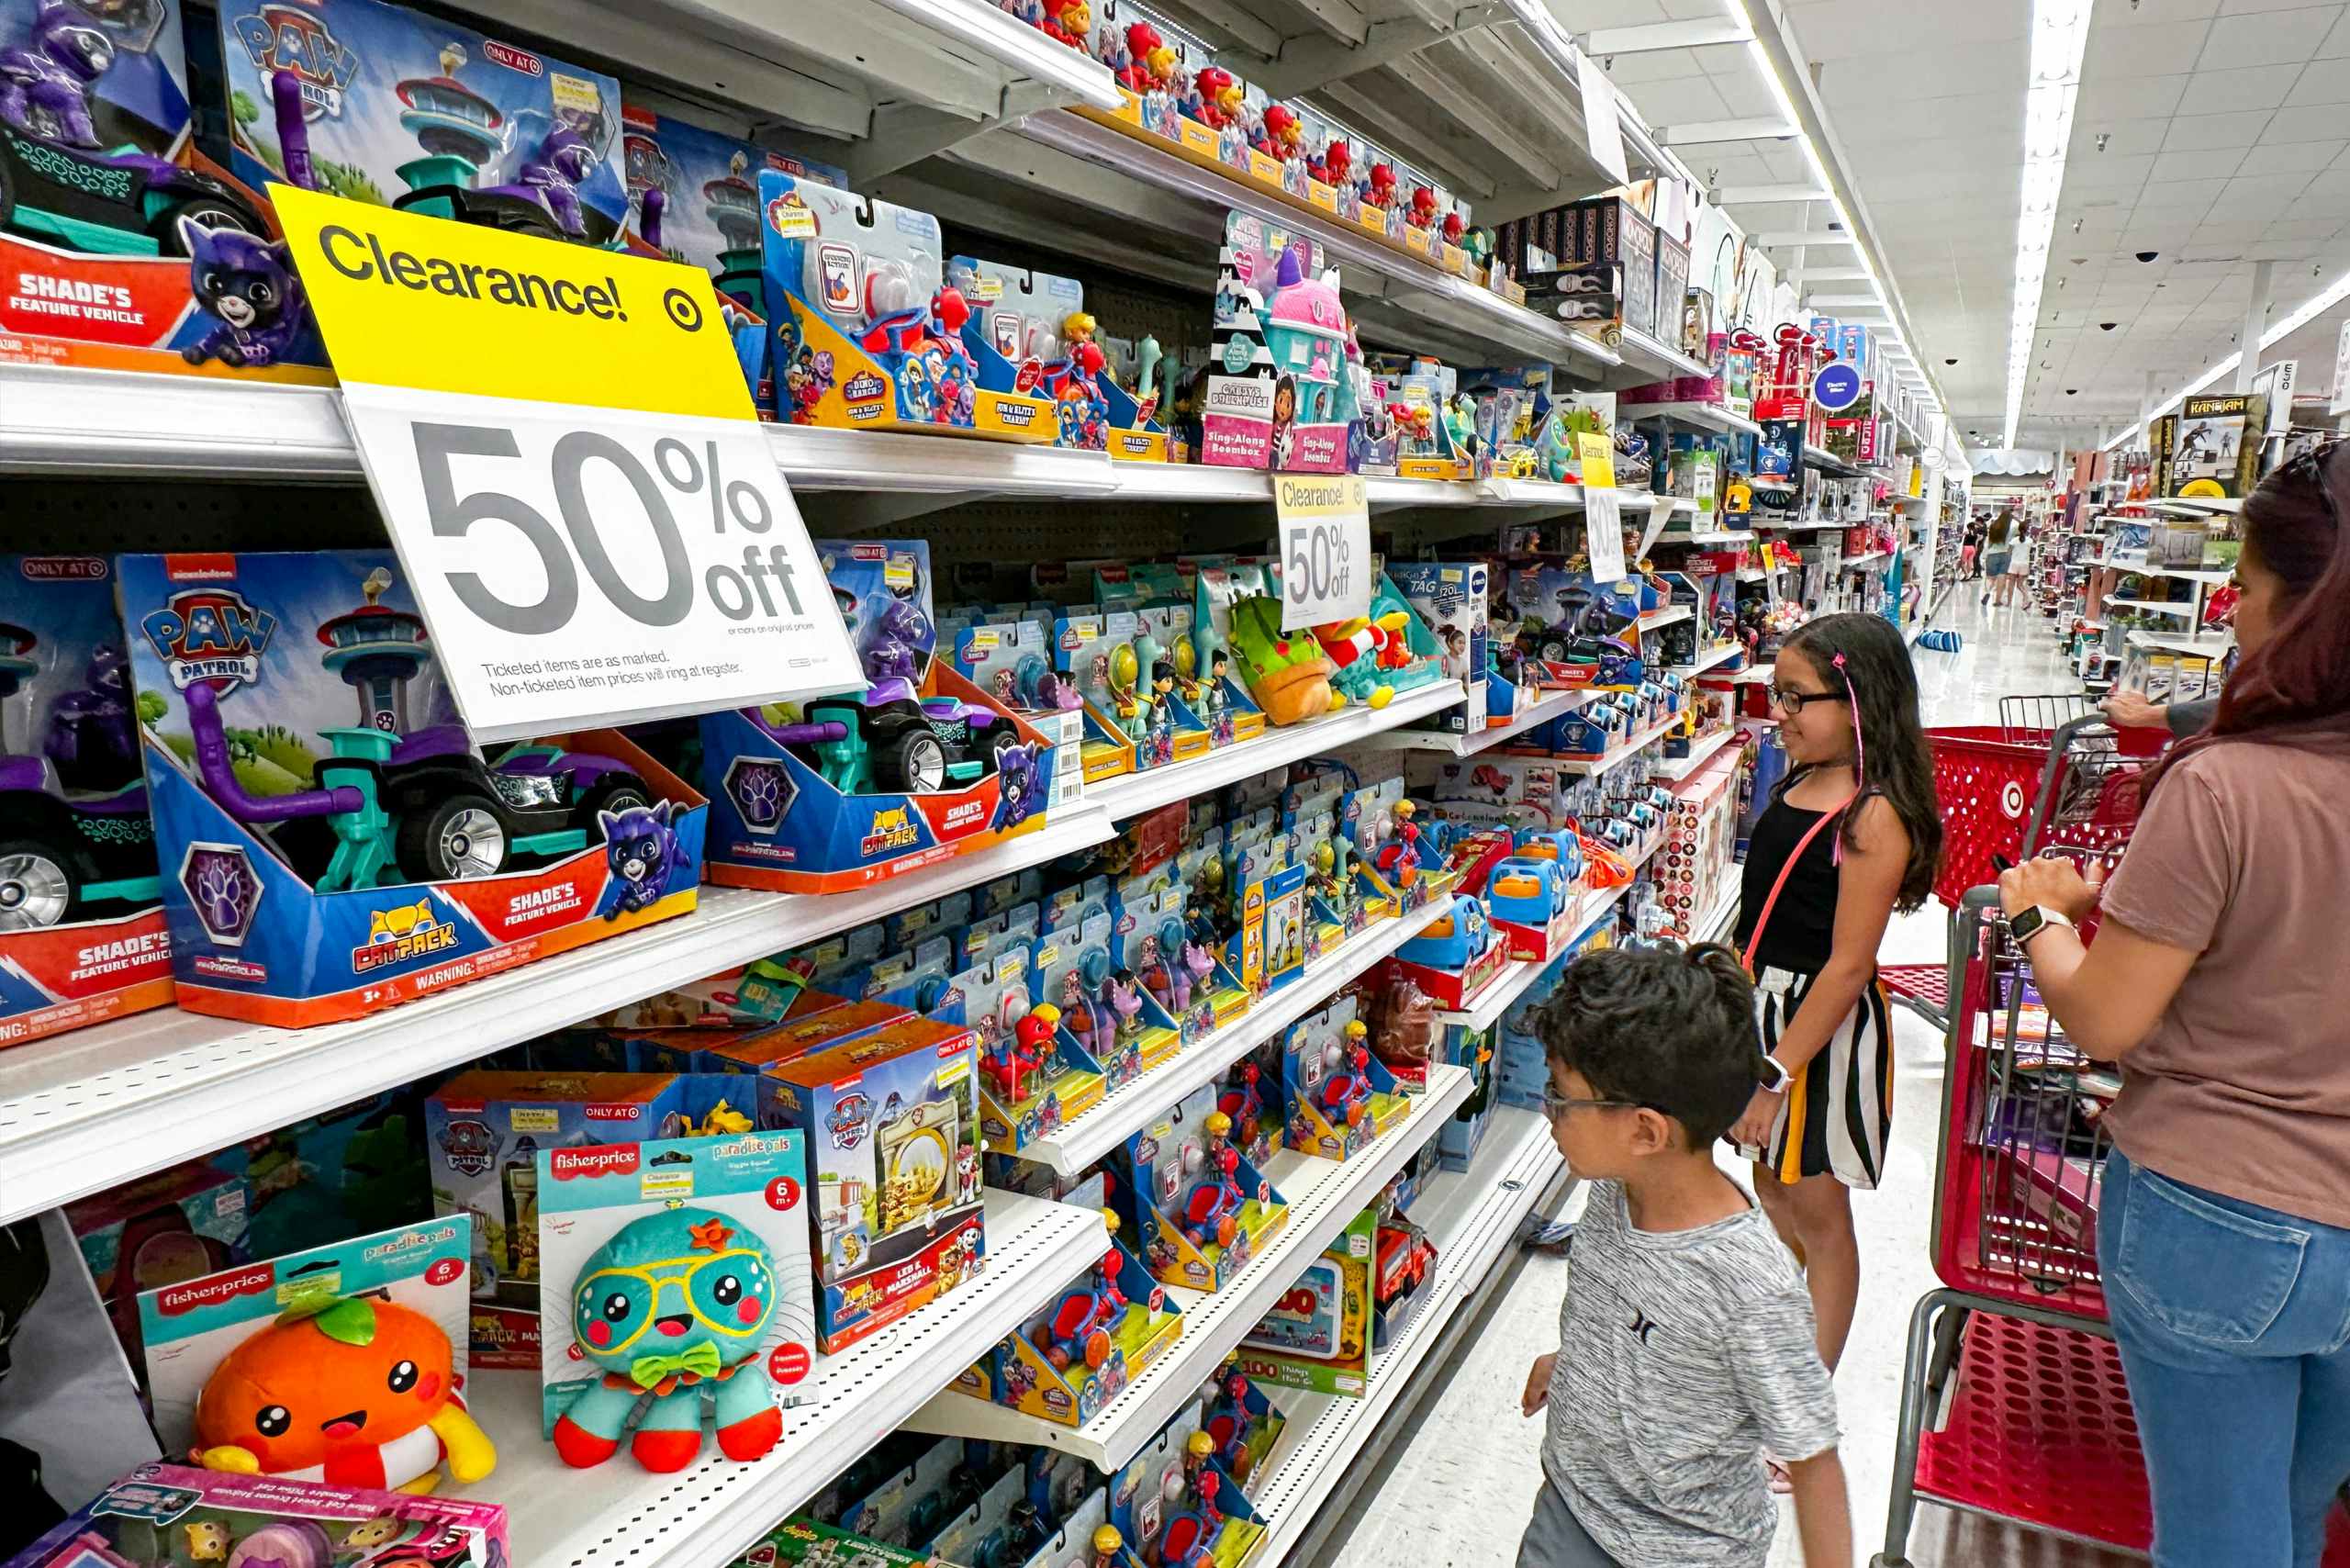 HOT!* Target - Toy clearance 30% to 50% off, as much as 70% off?